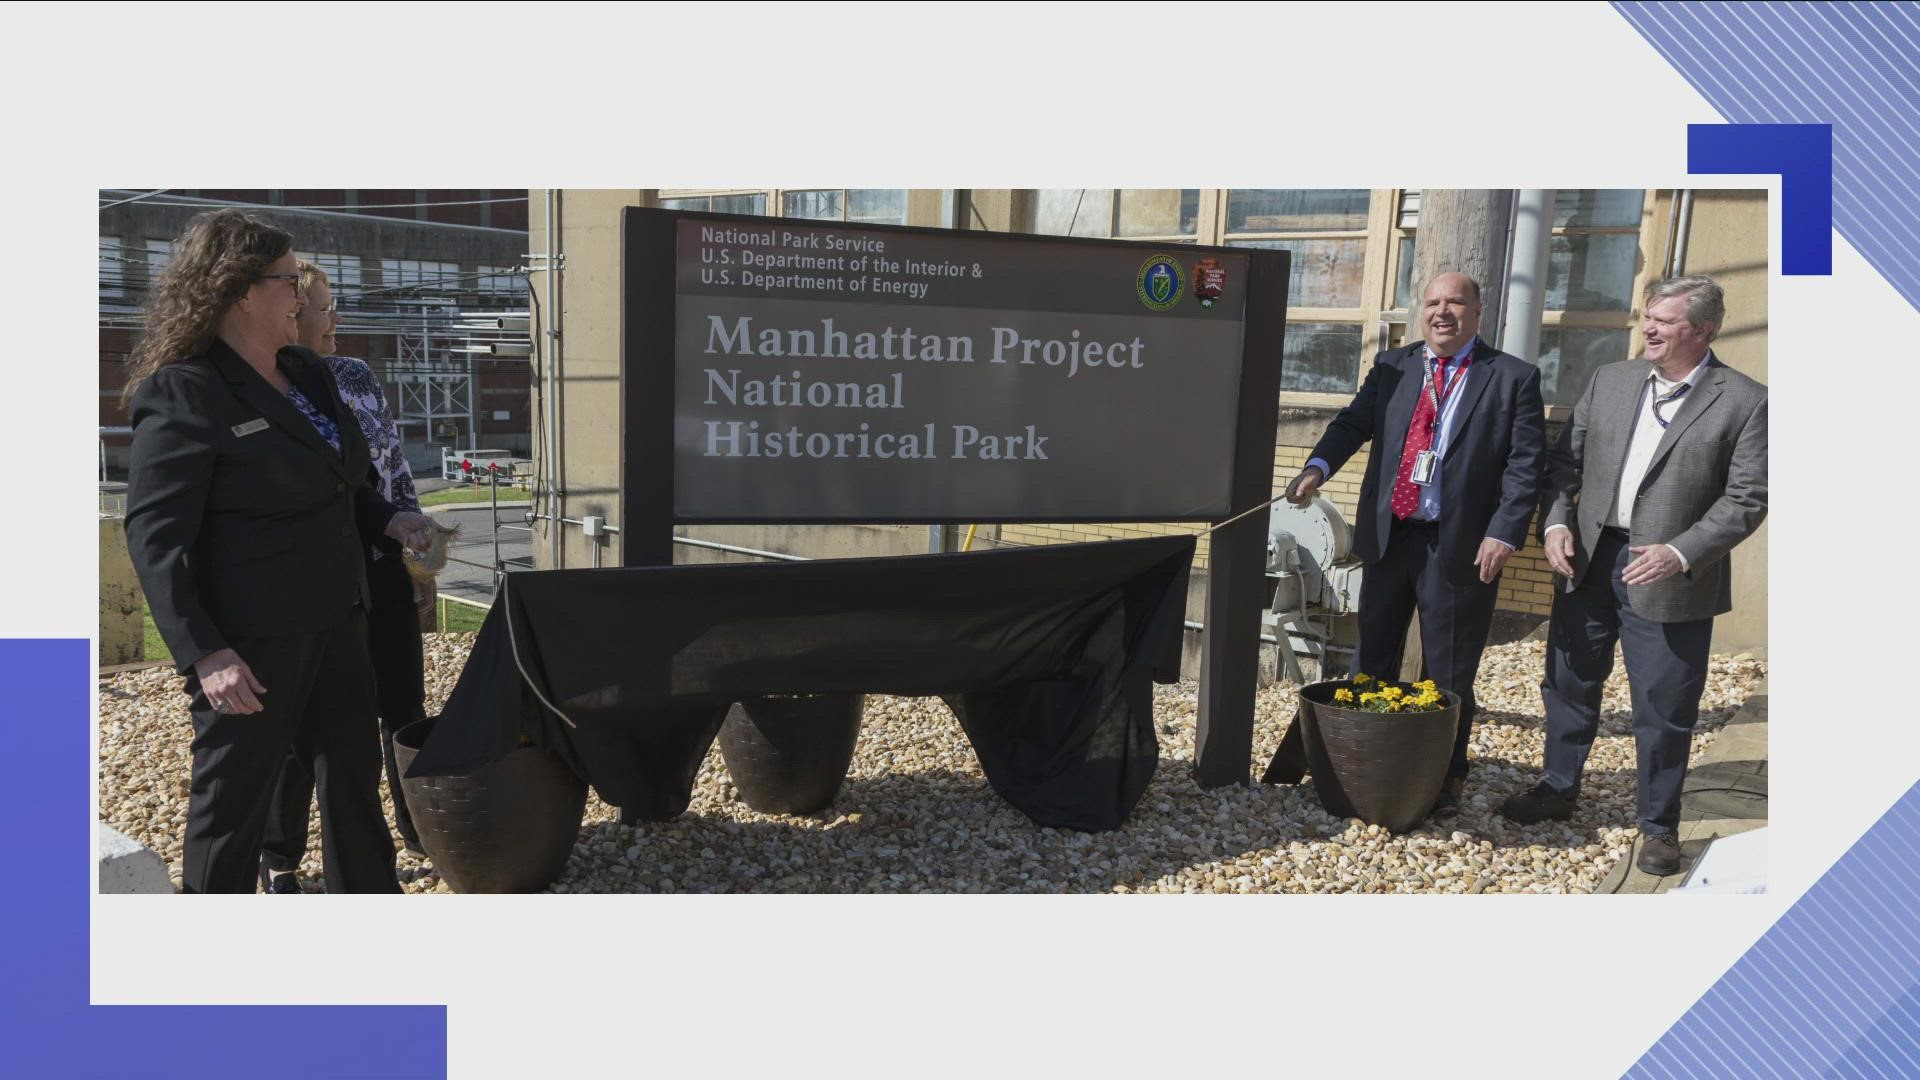 A ceremony was held at the Y-12 National Security Complex to unveil the sign at Building 9731, part of the NPS Manhattan Project National Historical Park.